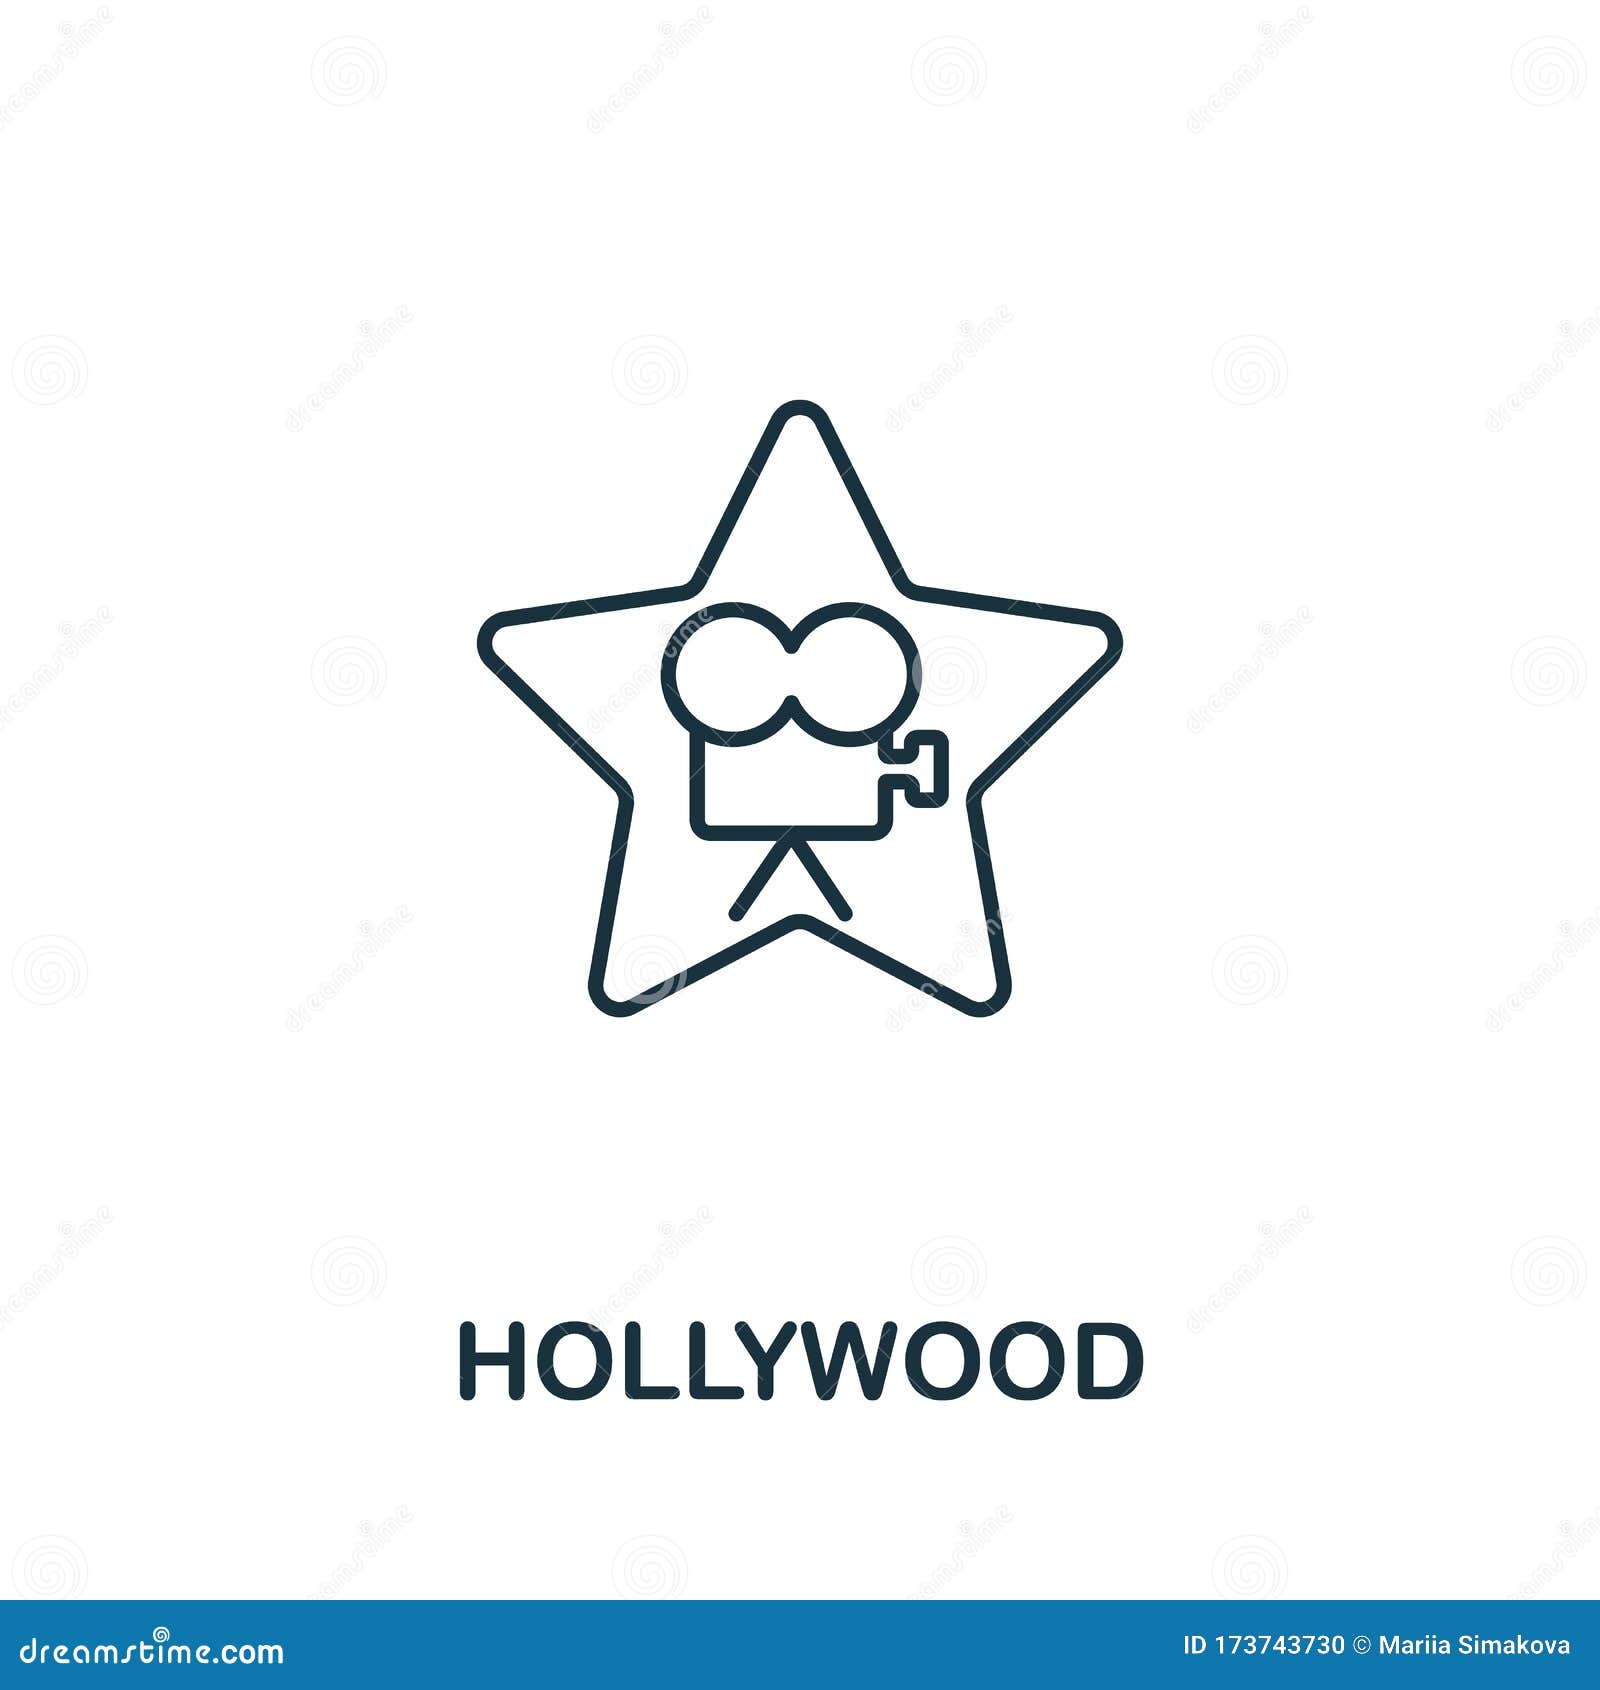 Hollywood Line Icons Collection. Glamour, Celebrities, Movies, Fame ...